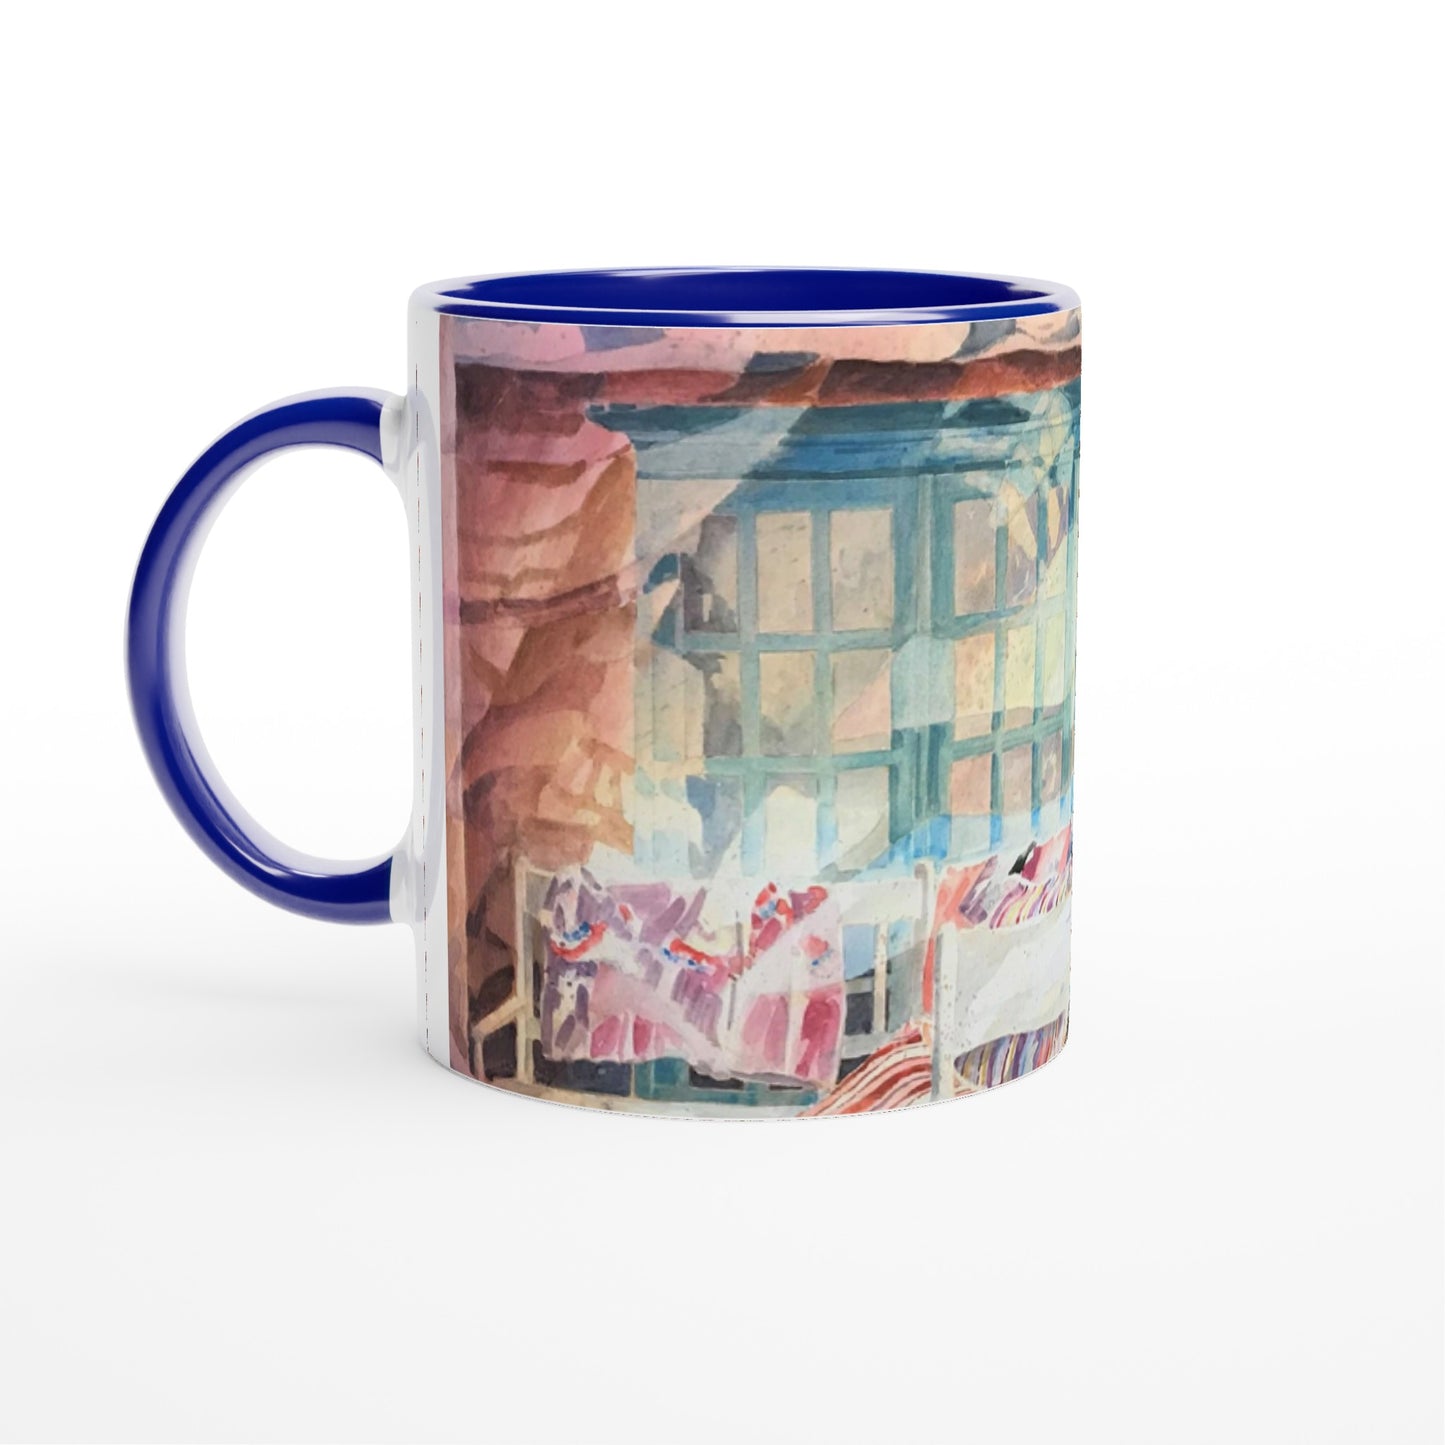 "Southwestern Home" White 11oz Ceramic Mug with Color Inside by Barbara Cleary Designs